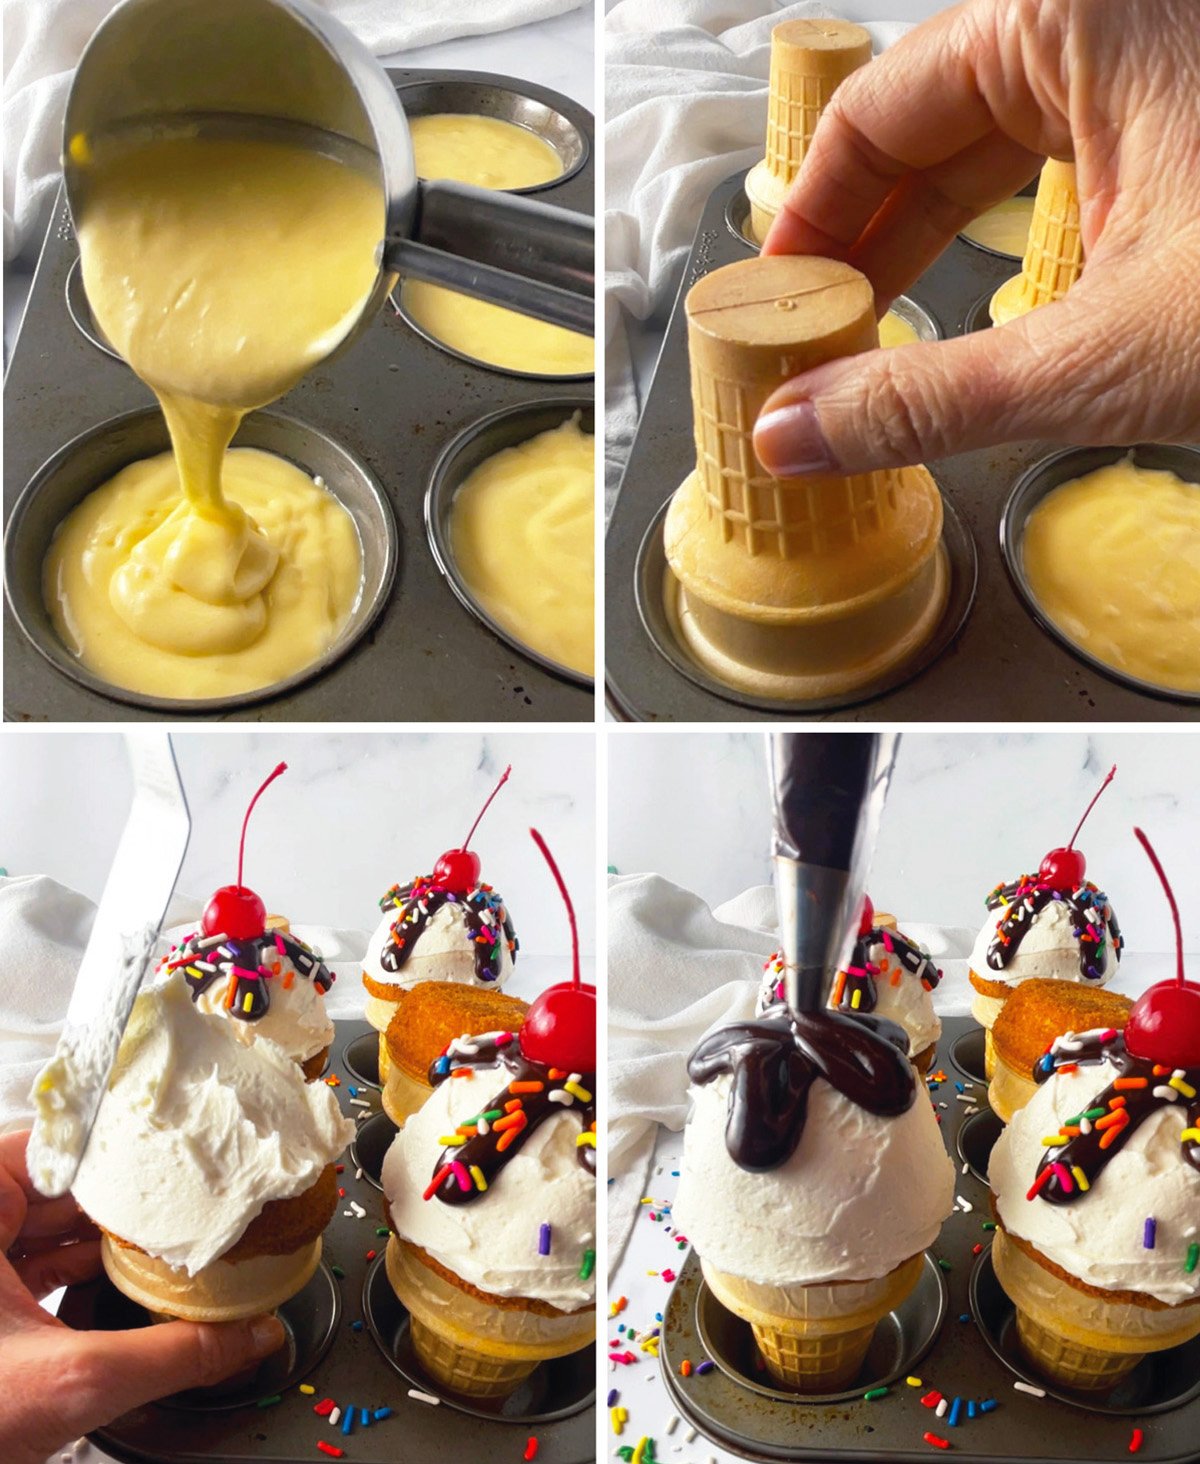 Photos showing four steps in making ice cream cone cupcakes.